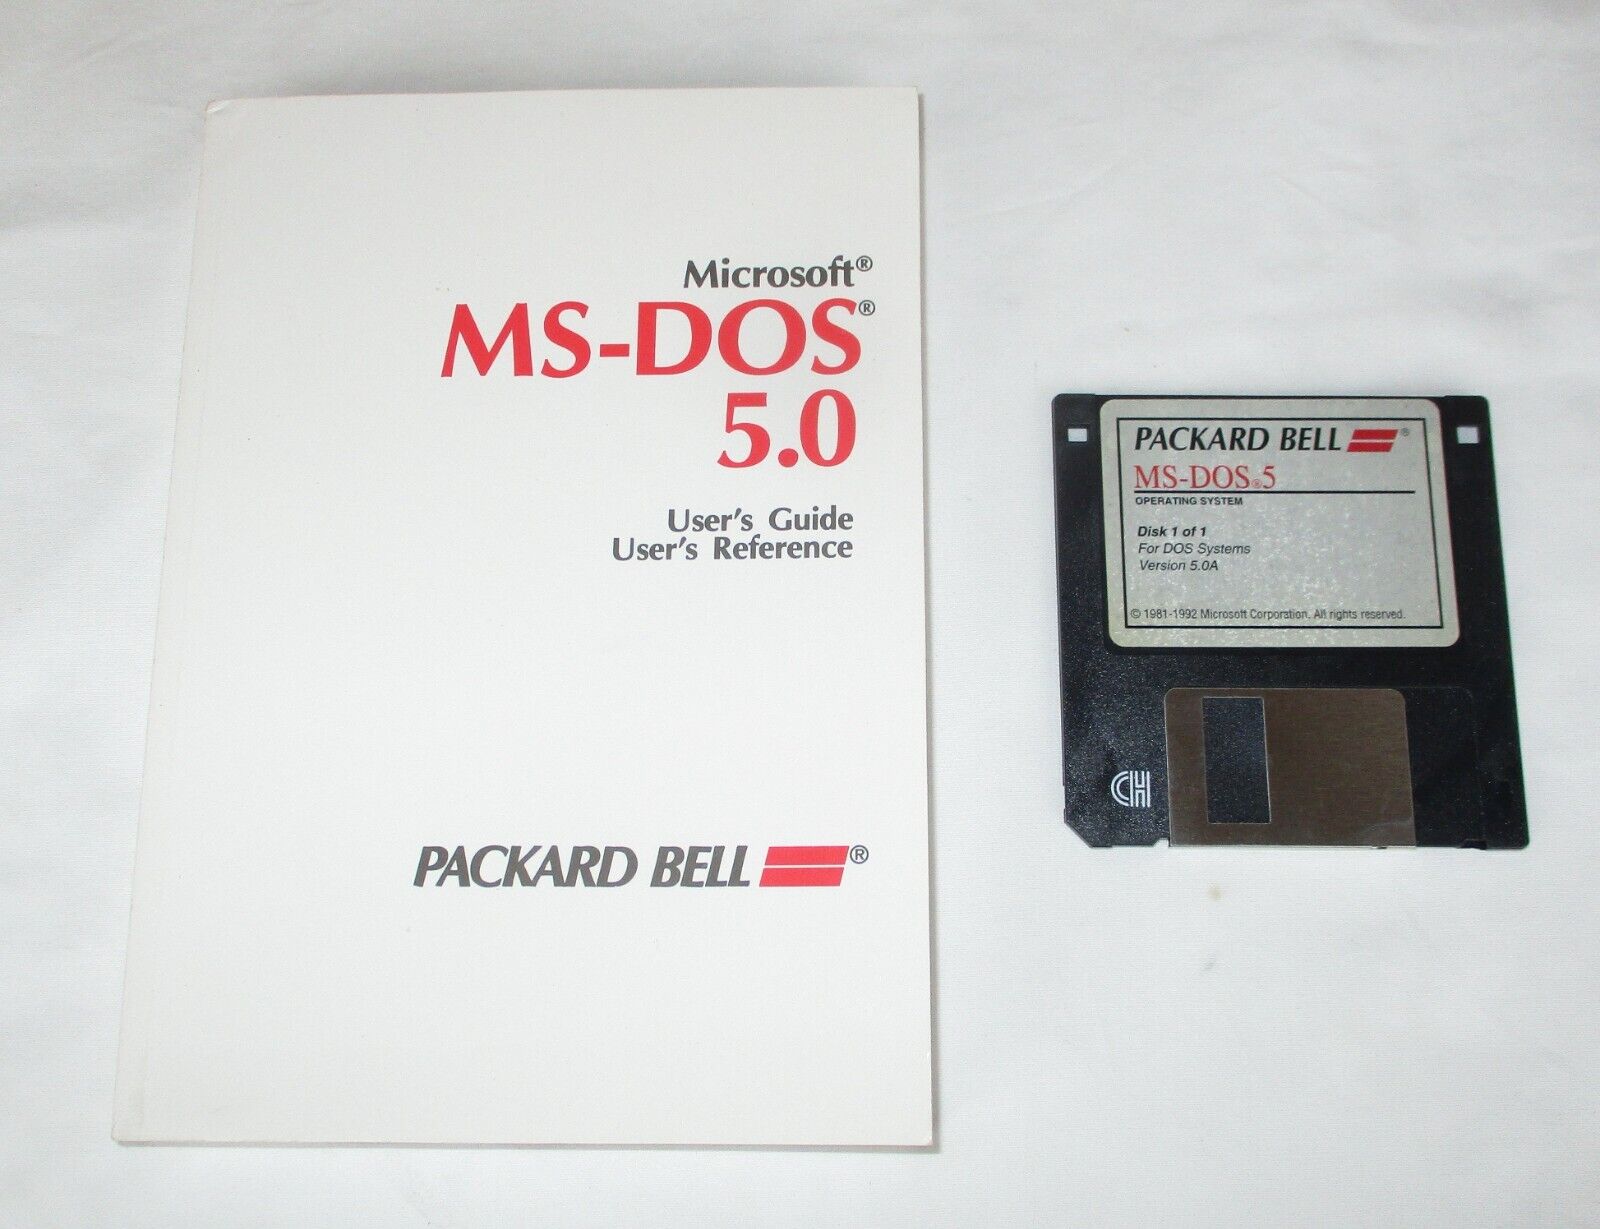 Packard Bell Microsoft MS-DOS 5.0 3.5